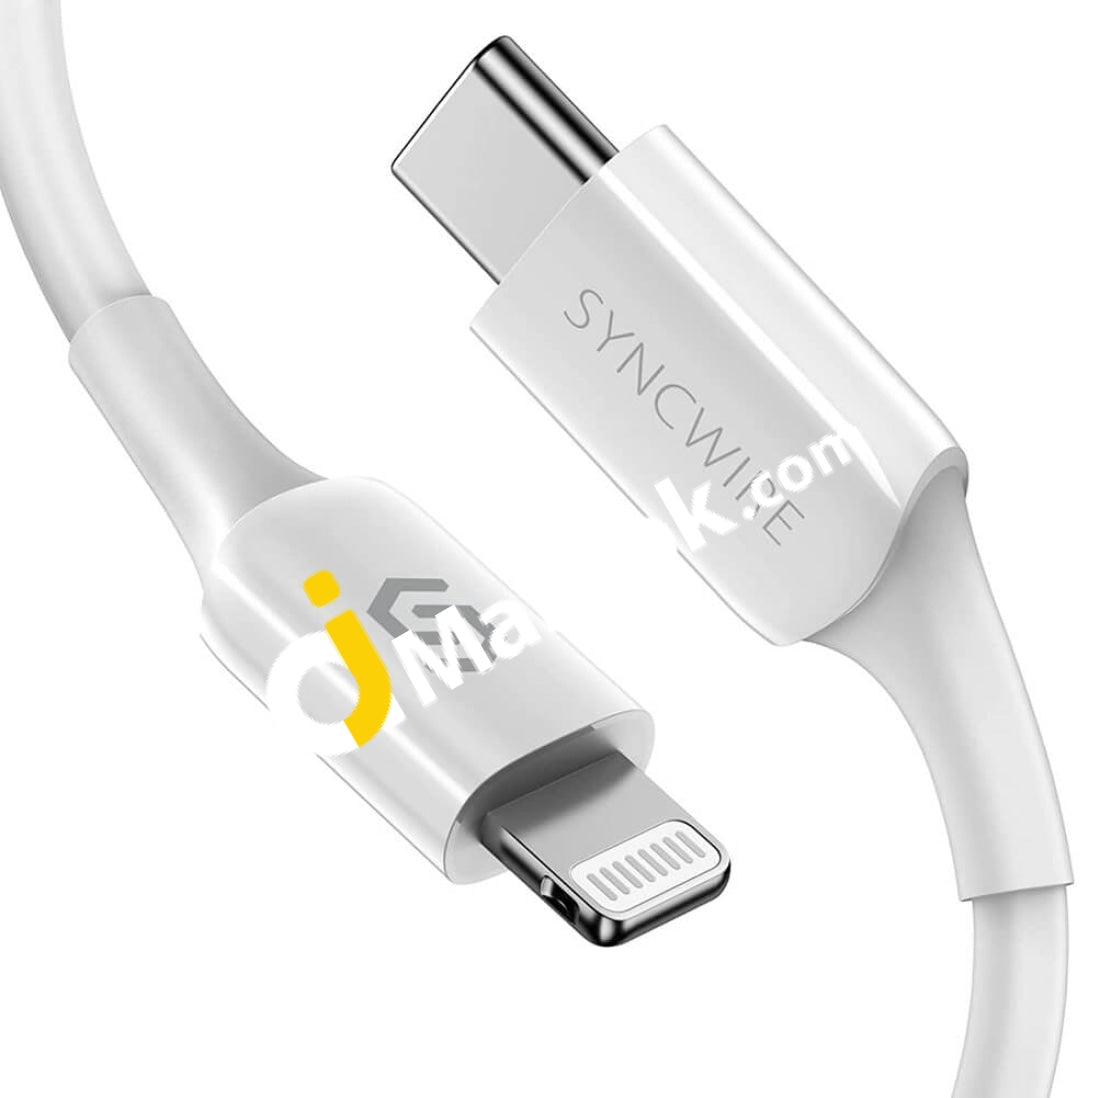 iPhone Charger Syncwire Lightning Cable - [Apple MFi Certified] 3.3Ft/1M  High Speed Apple Charger Cable Cord USB Fast Charging Cable for iPhone 11  XS